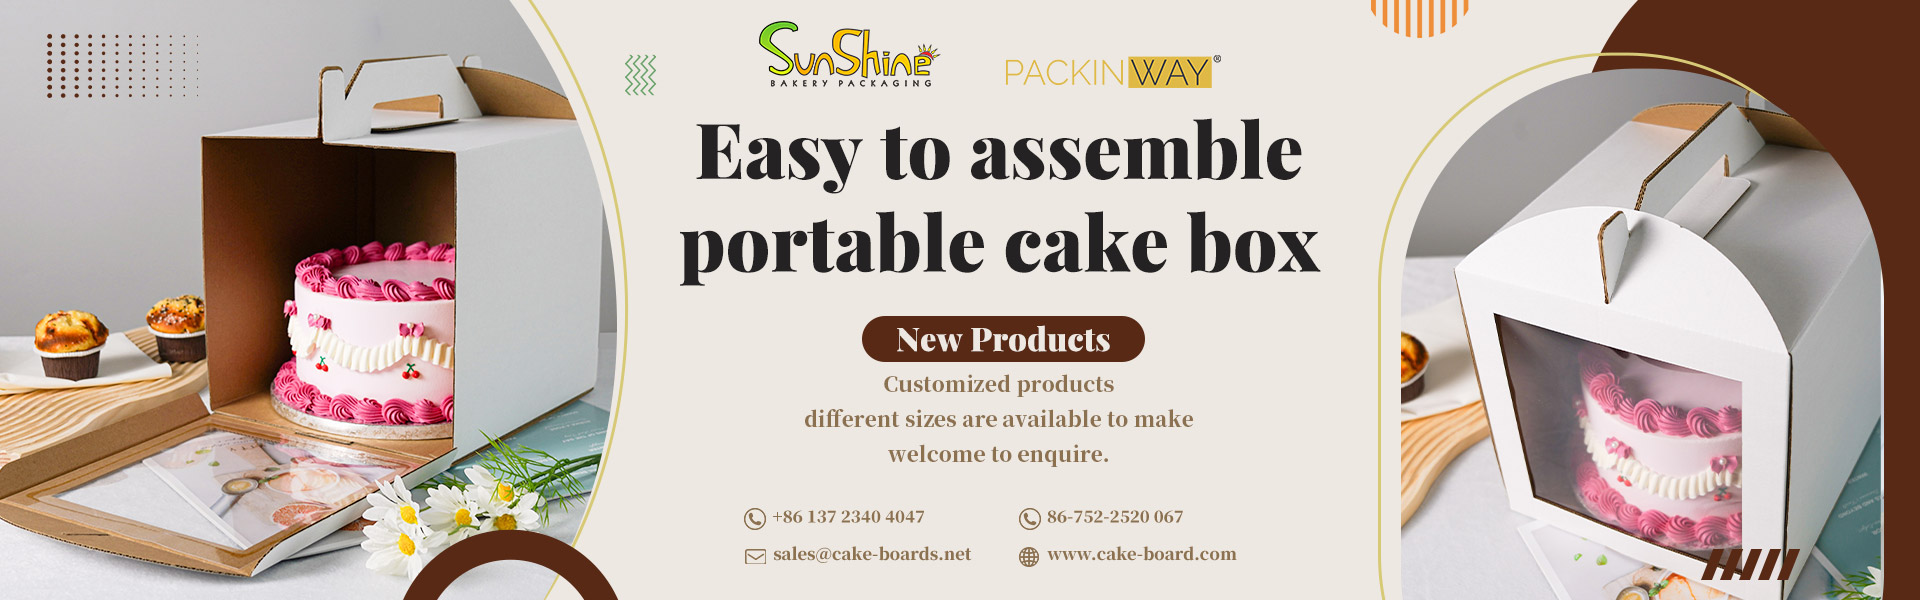 Easy to assemble portable cake box